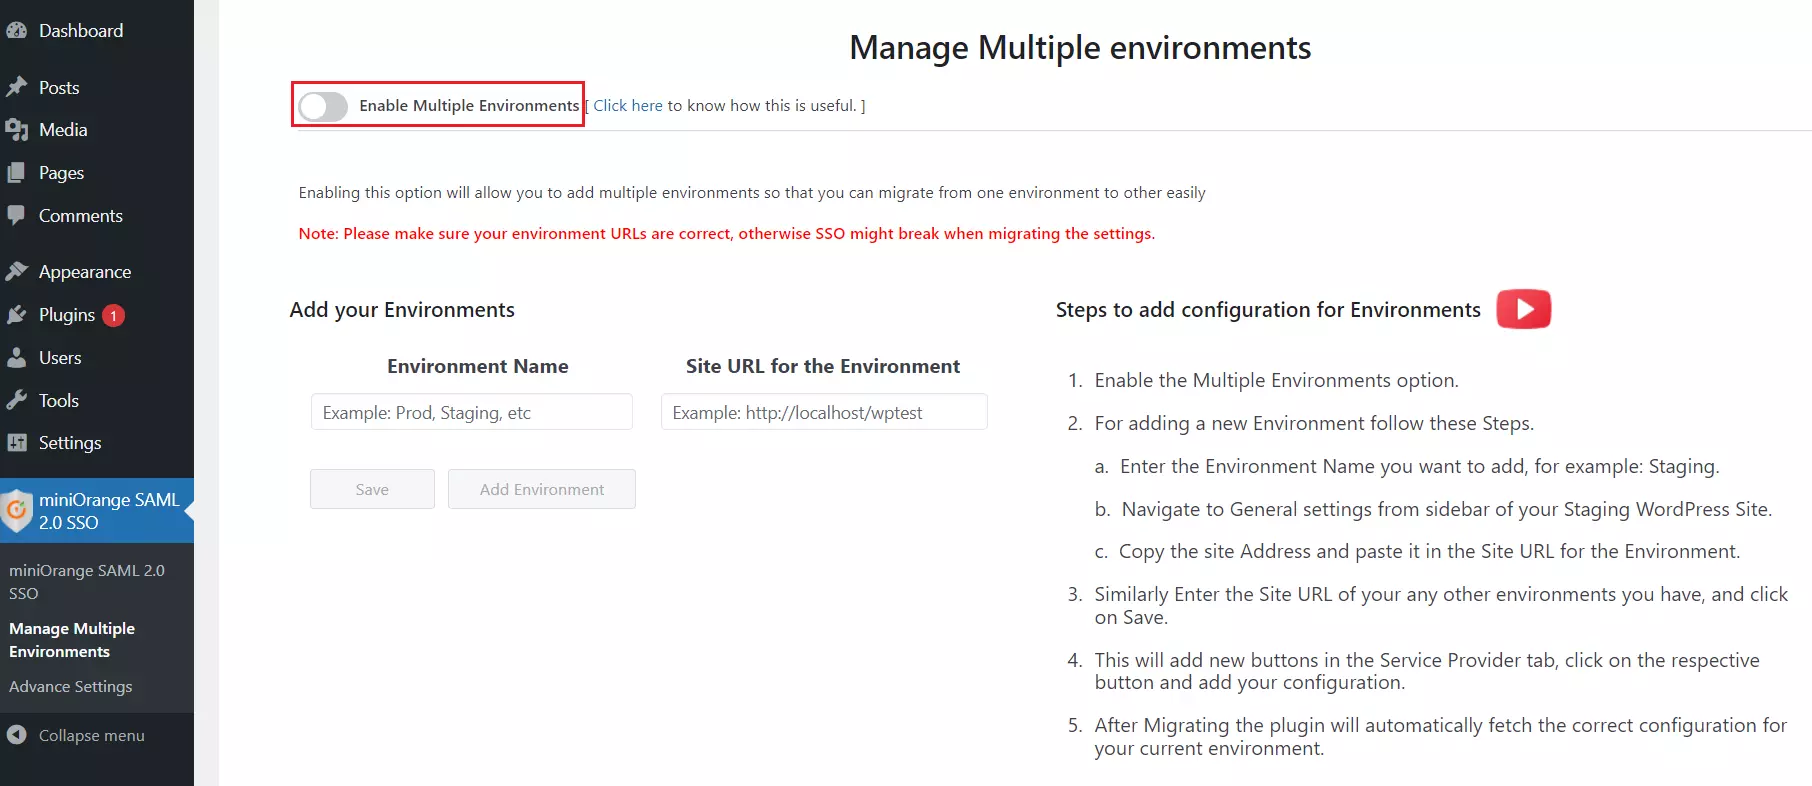 Enable Multiple Environments - Migration in Multiple Environments